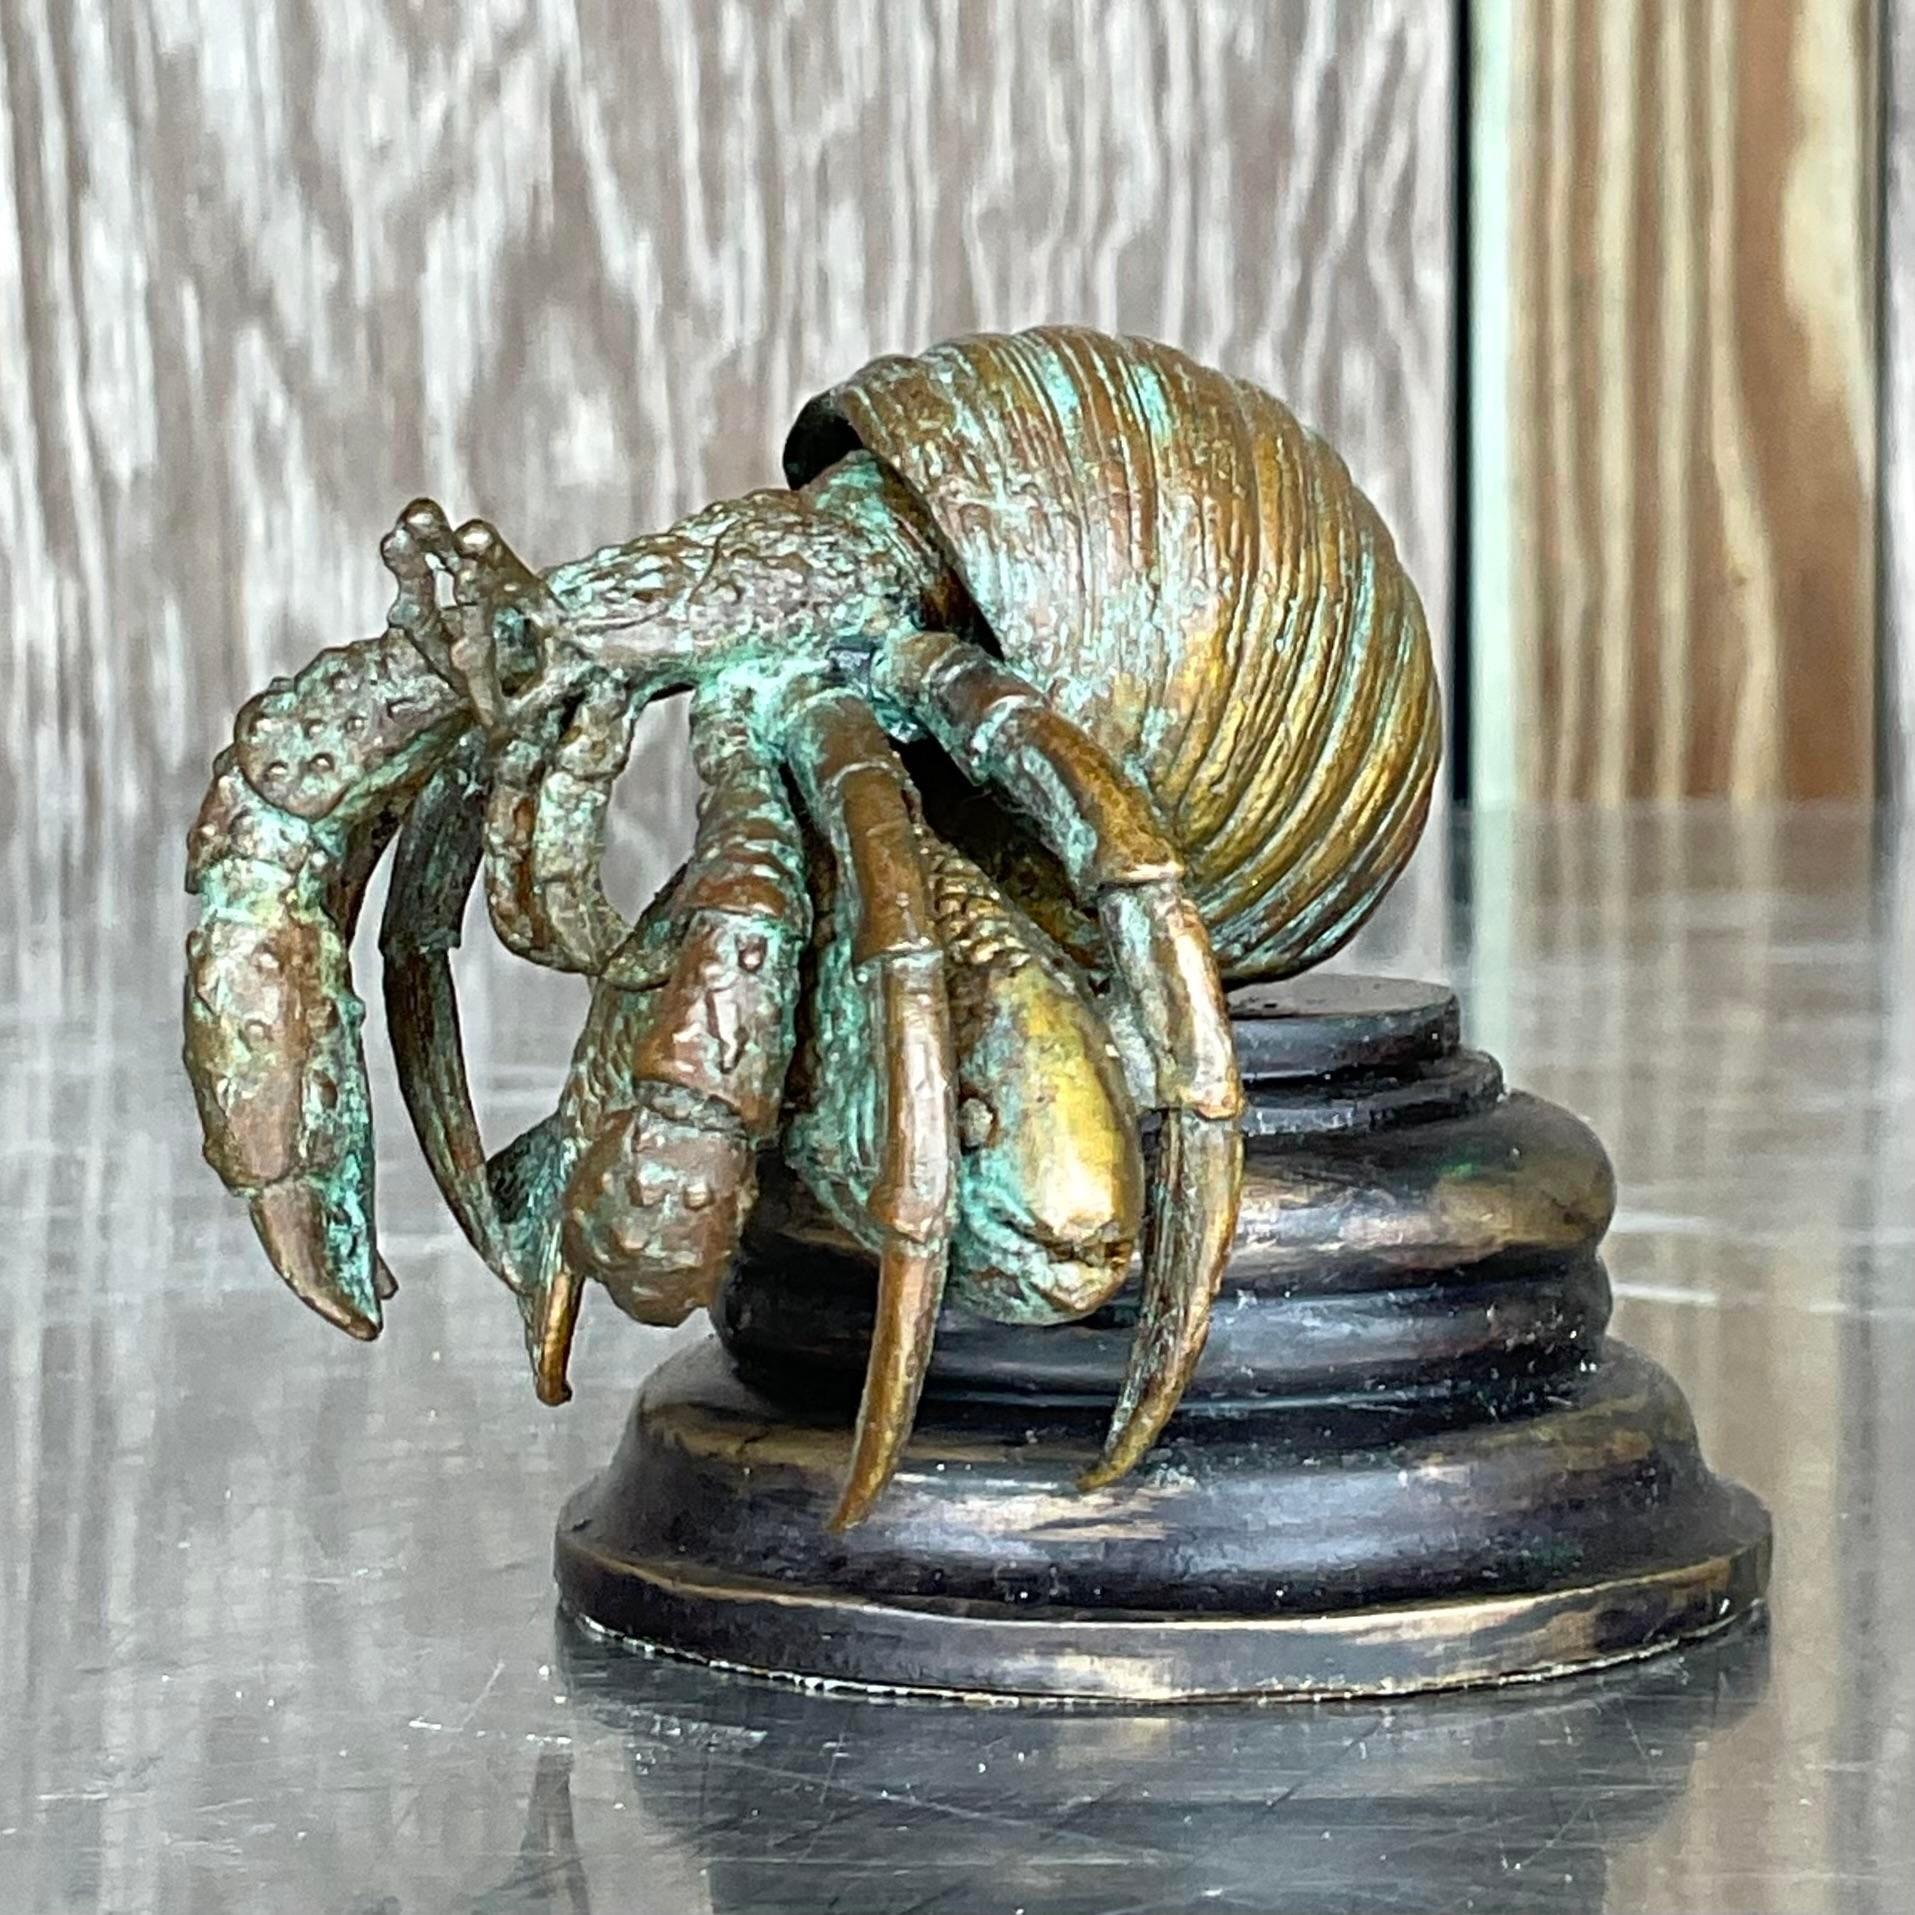 A fantastic vintage Coastal hermit crab. A chic patinated bronze crab on a milled wooden plinth. Made by the iconic Maitland Smith group and tagged on the bottom. Acquired from a palm Beach estate.